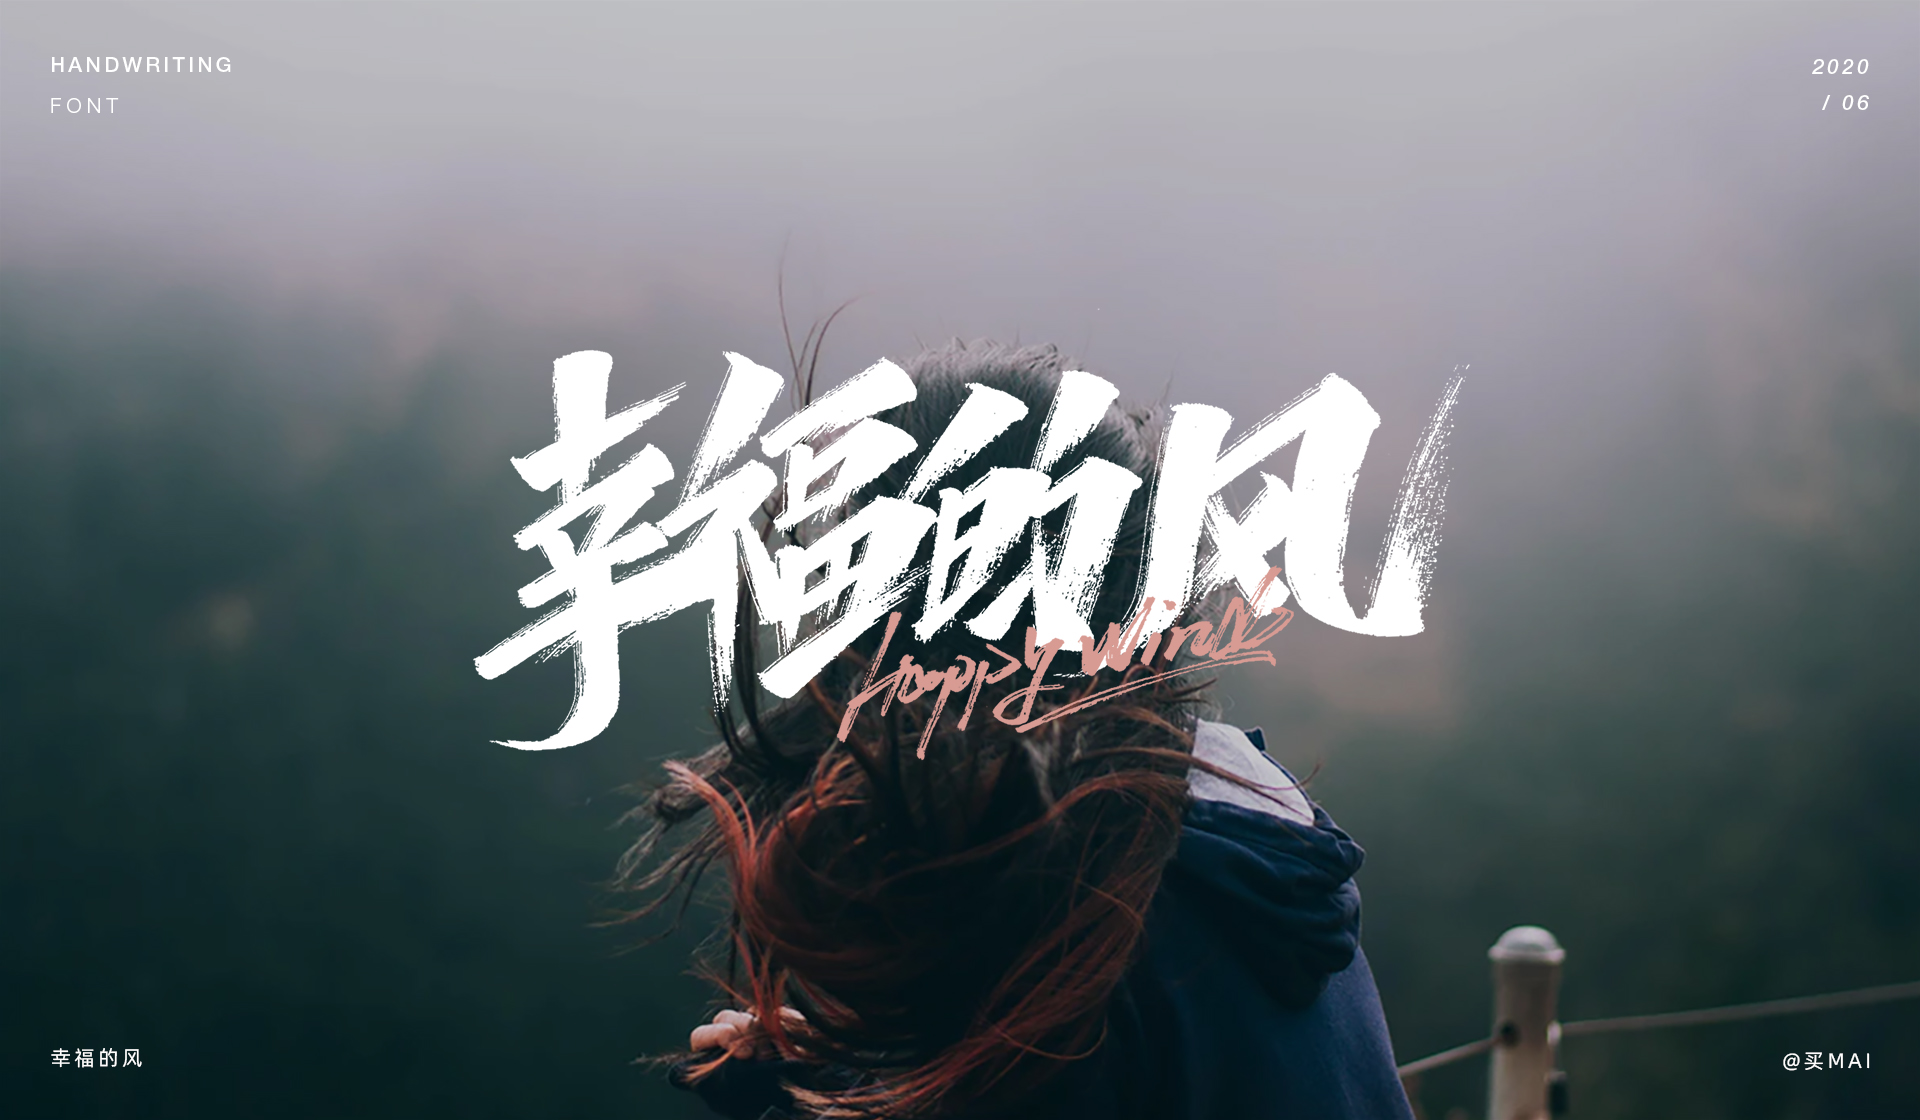 Writing brush font design combining calligraphy and painting.